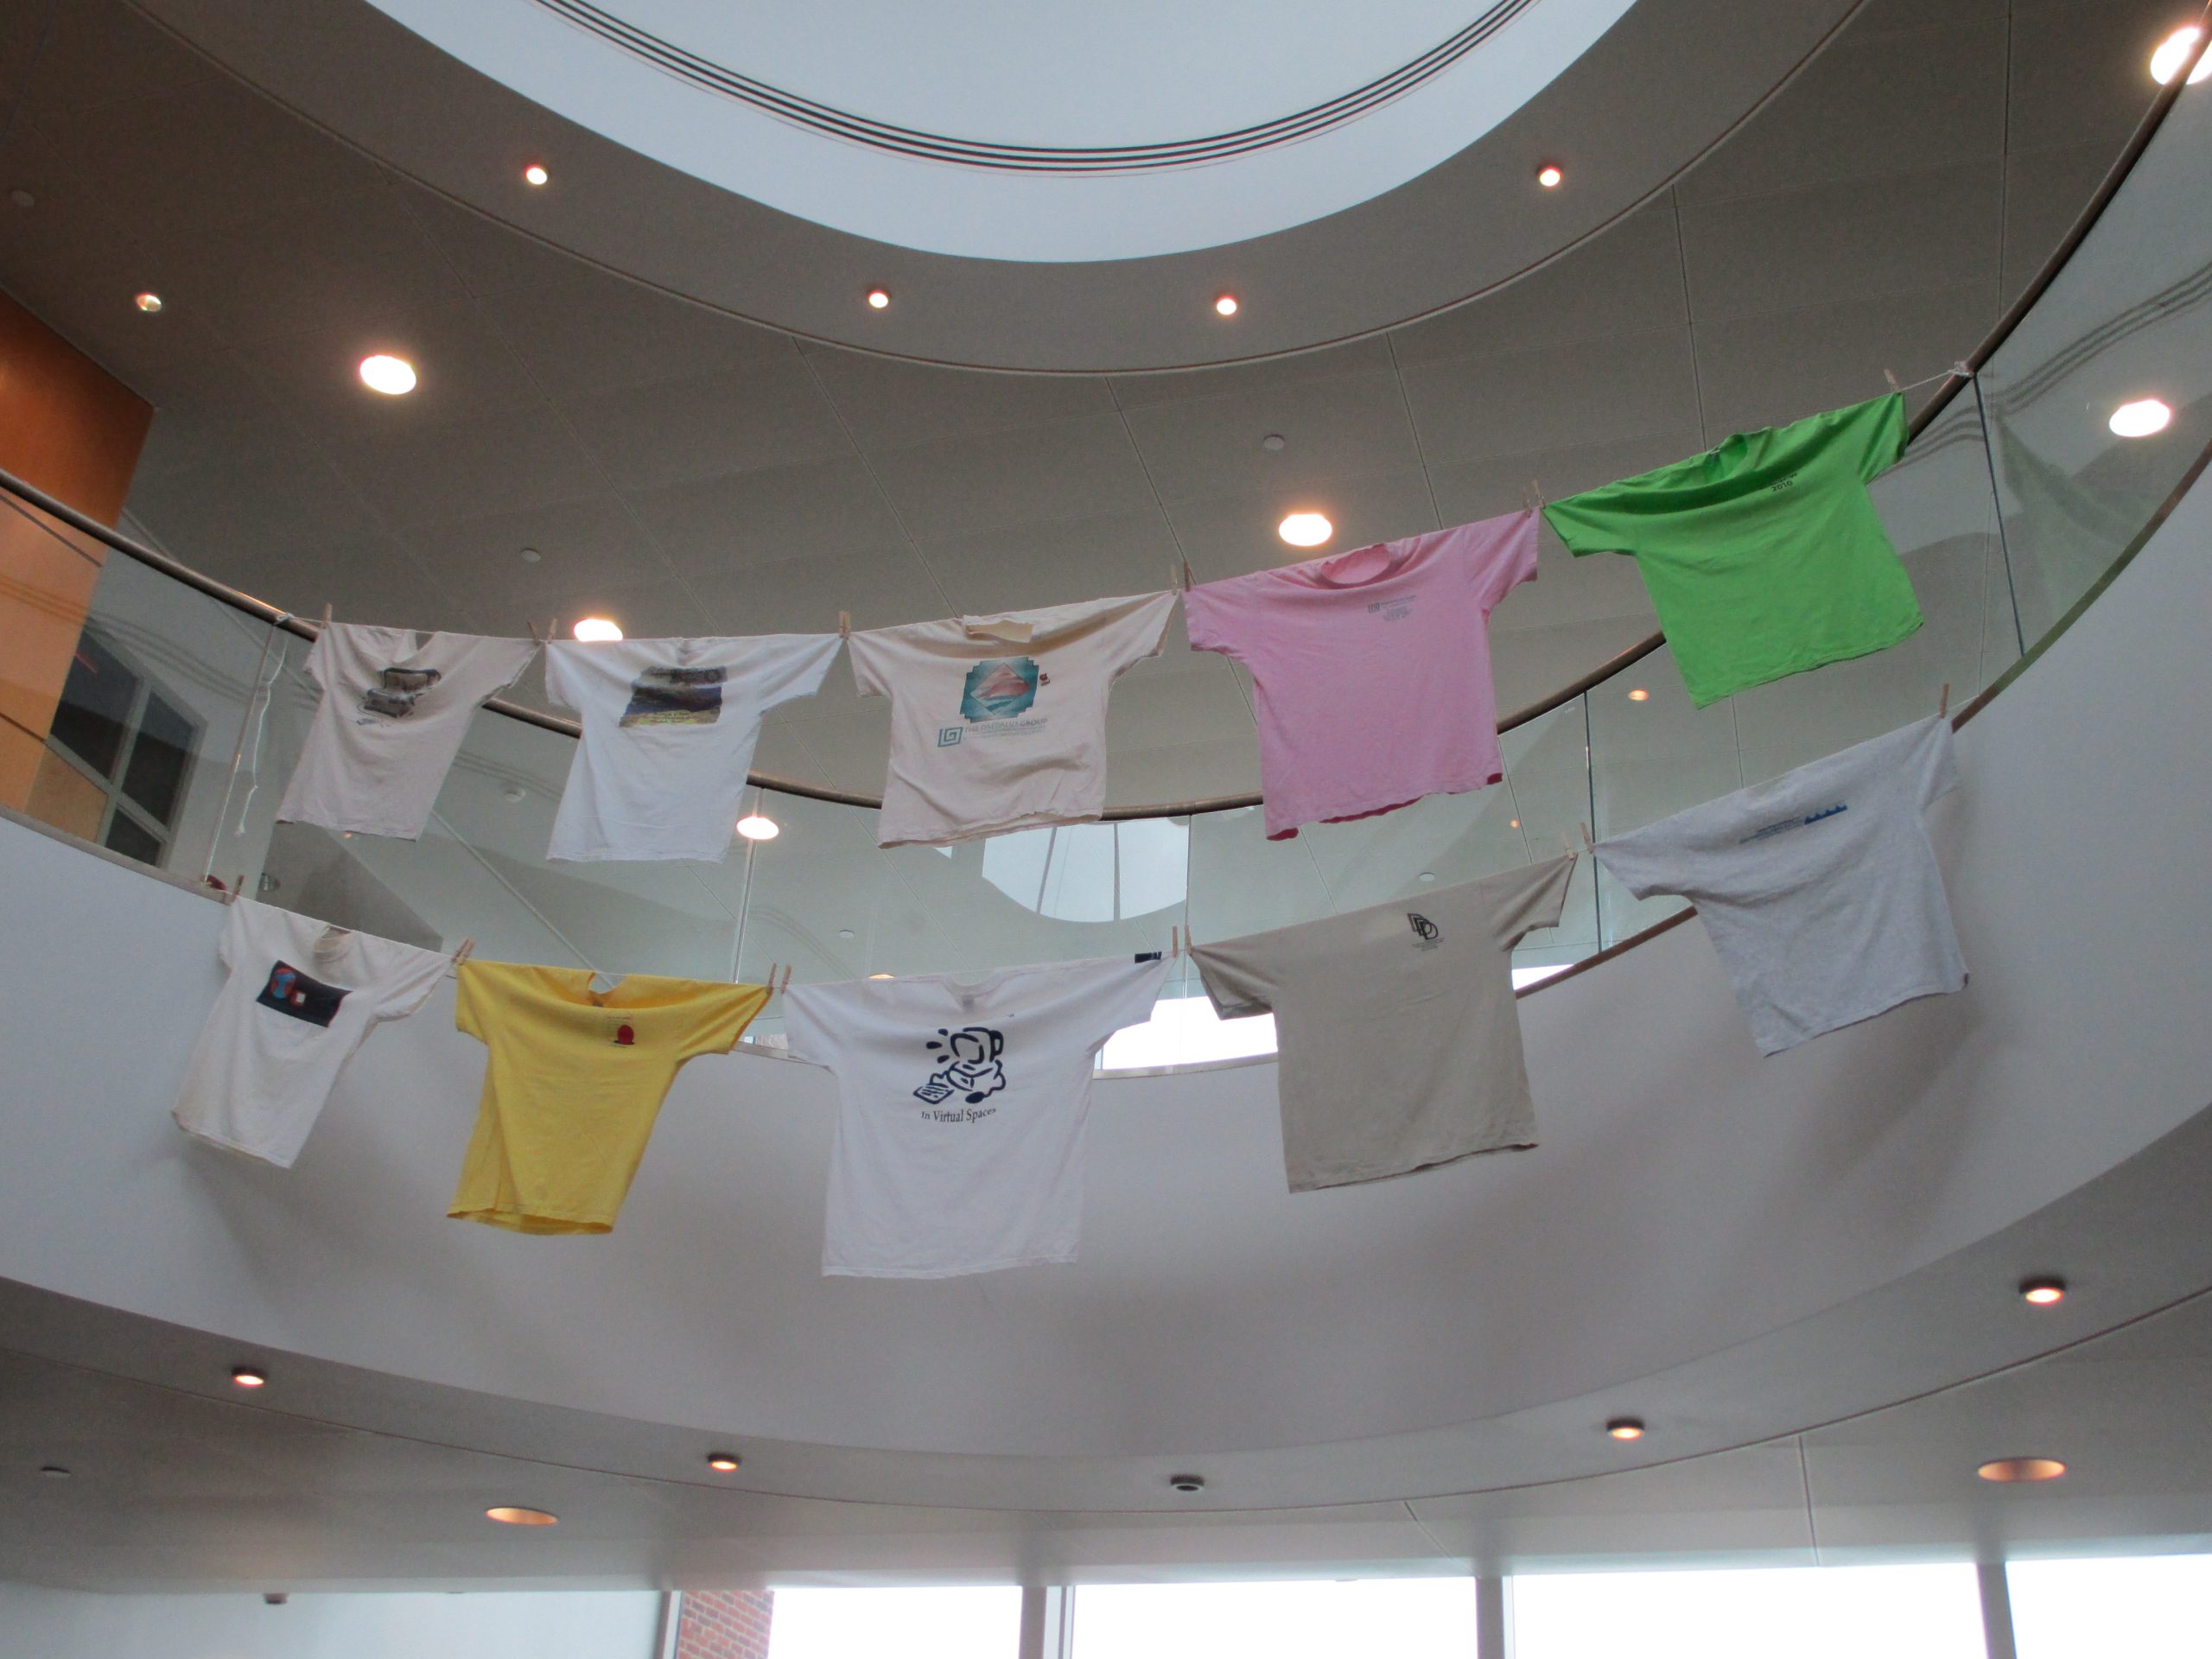 Tee shirts hung on clothslines across a rotunda area at the Computers and Writing 2013 registration area, Frostburg State Univesity, Maryland